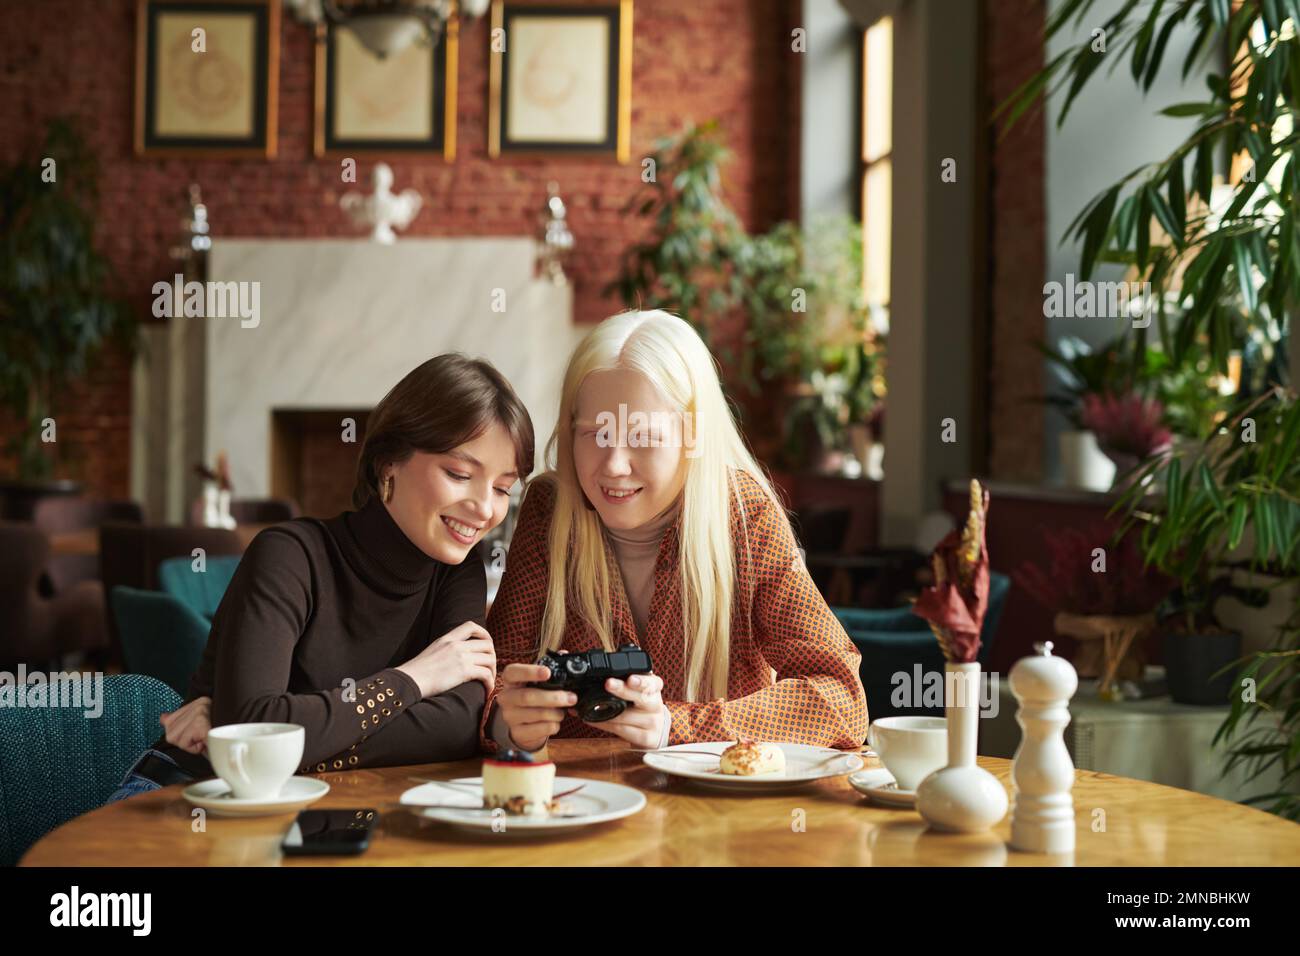 Young smiling albino woman showing her friend new photos in photocamera while sitting by table in cafe at lunch Stock Photo